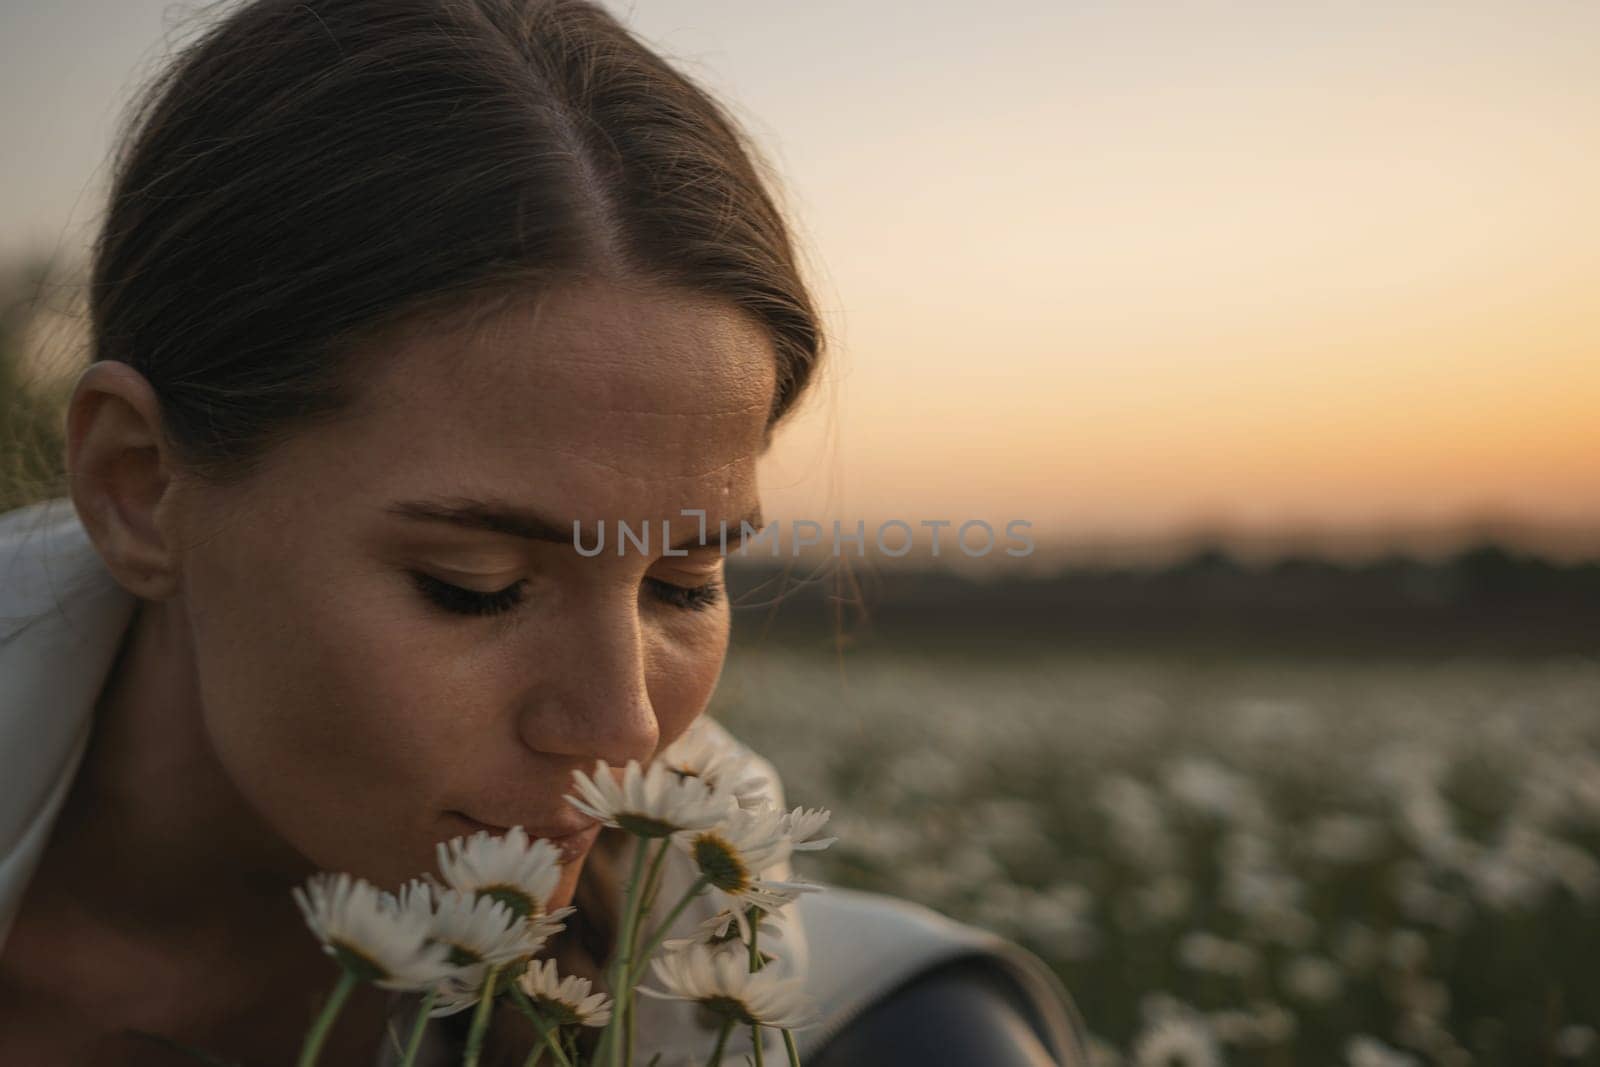 A woman is smelling flowers in a field. The flowers are white and the sky is orange. The woman is looking at the camera. by Matiunina